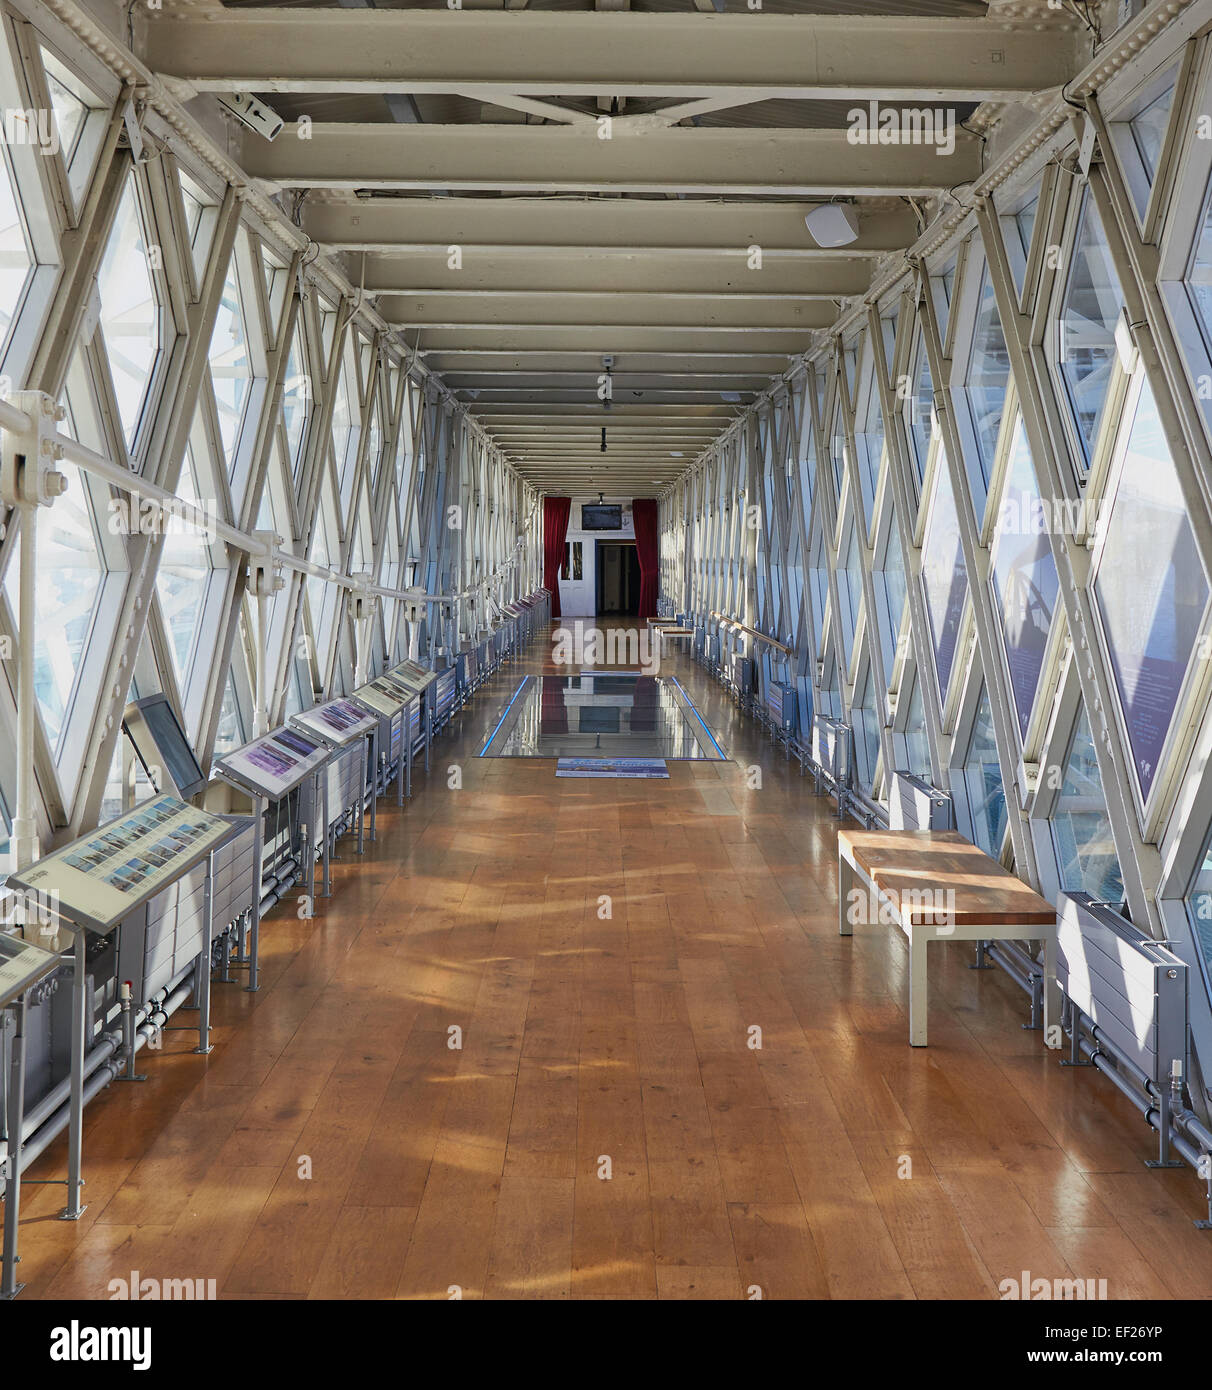 Inside Tower Bridge high level walkway with the new glass section 42 metres above river Thames London England Europe. Stock Photo